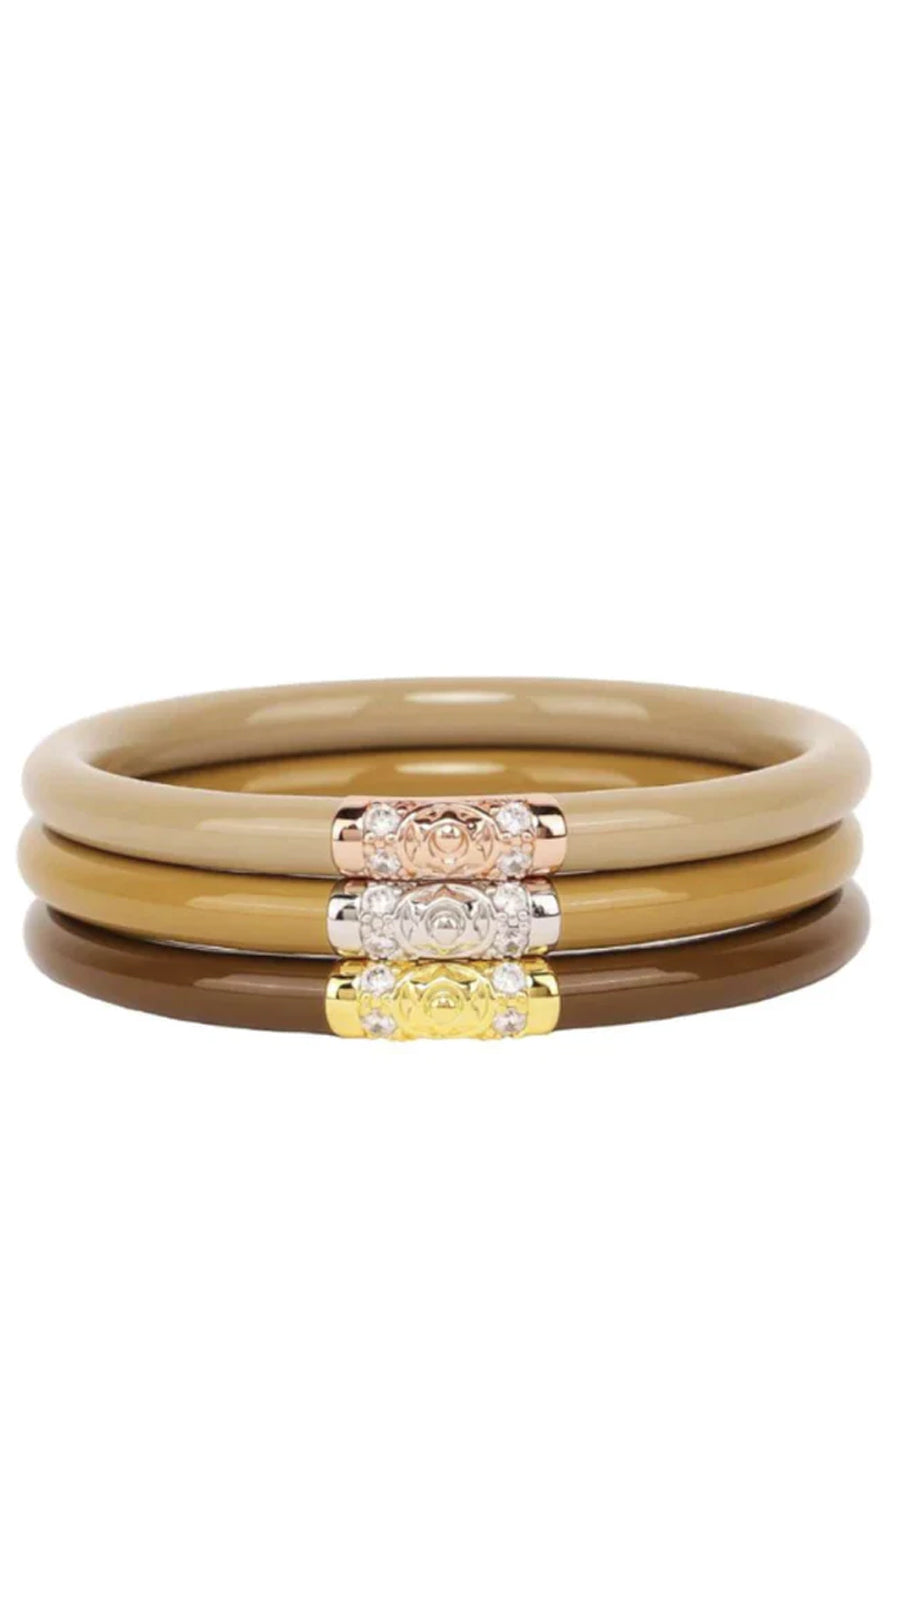 THREE KINGS ALL WEATHER BANGLES ORO